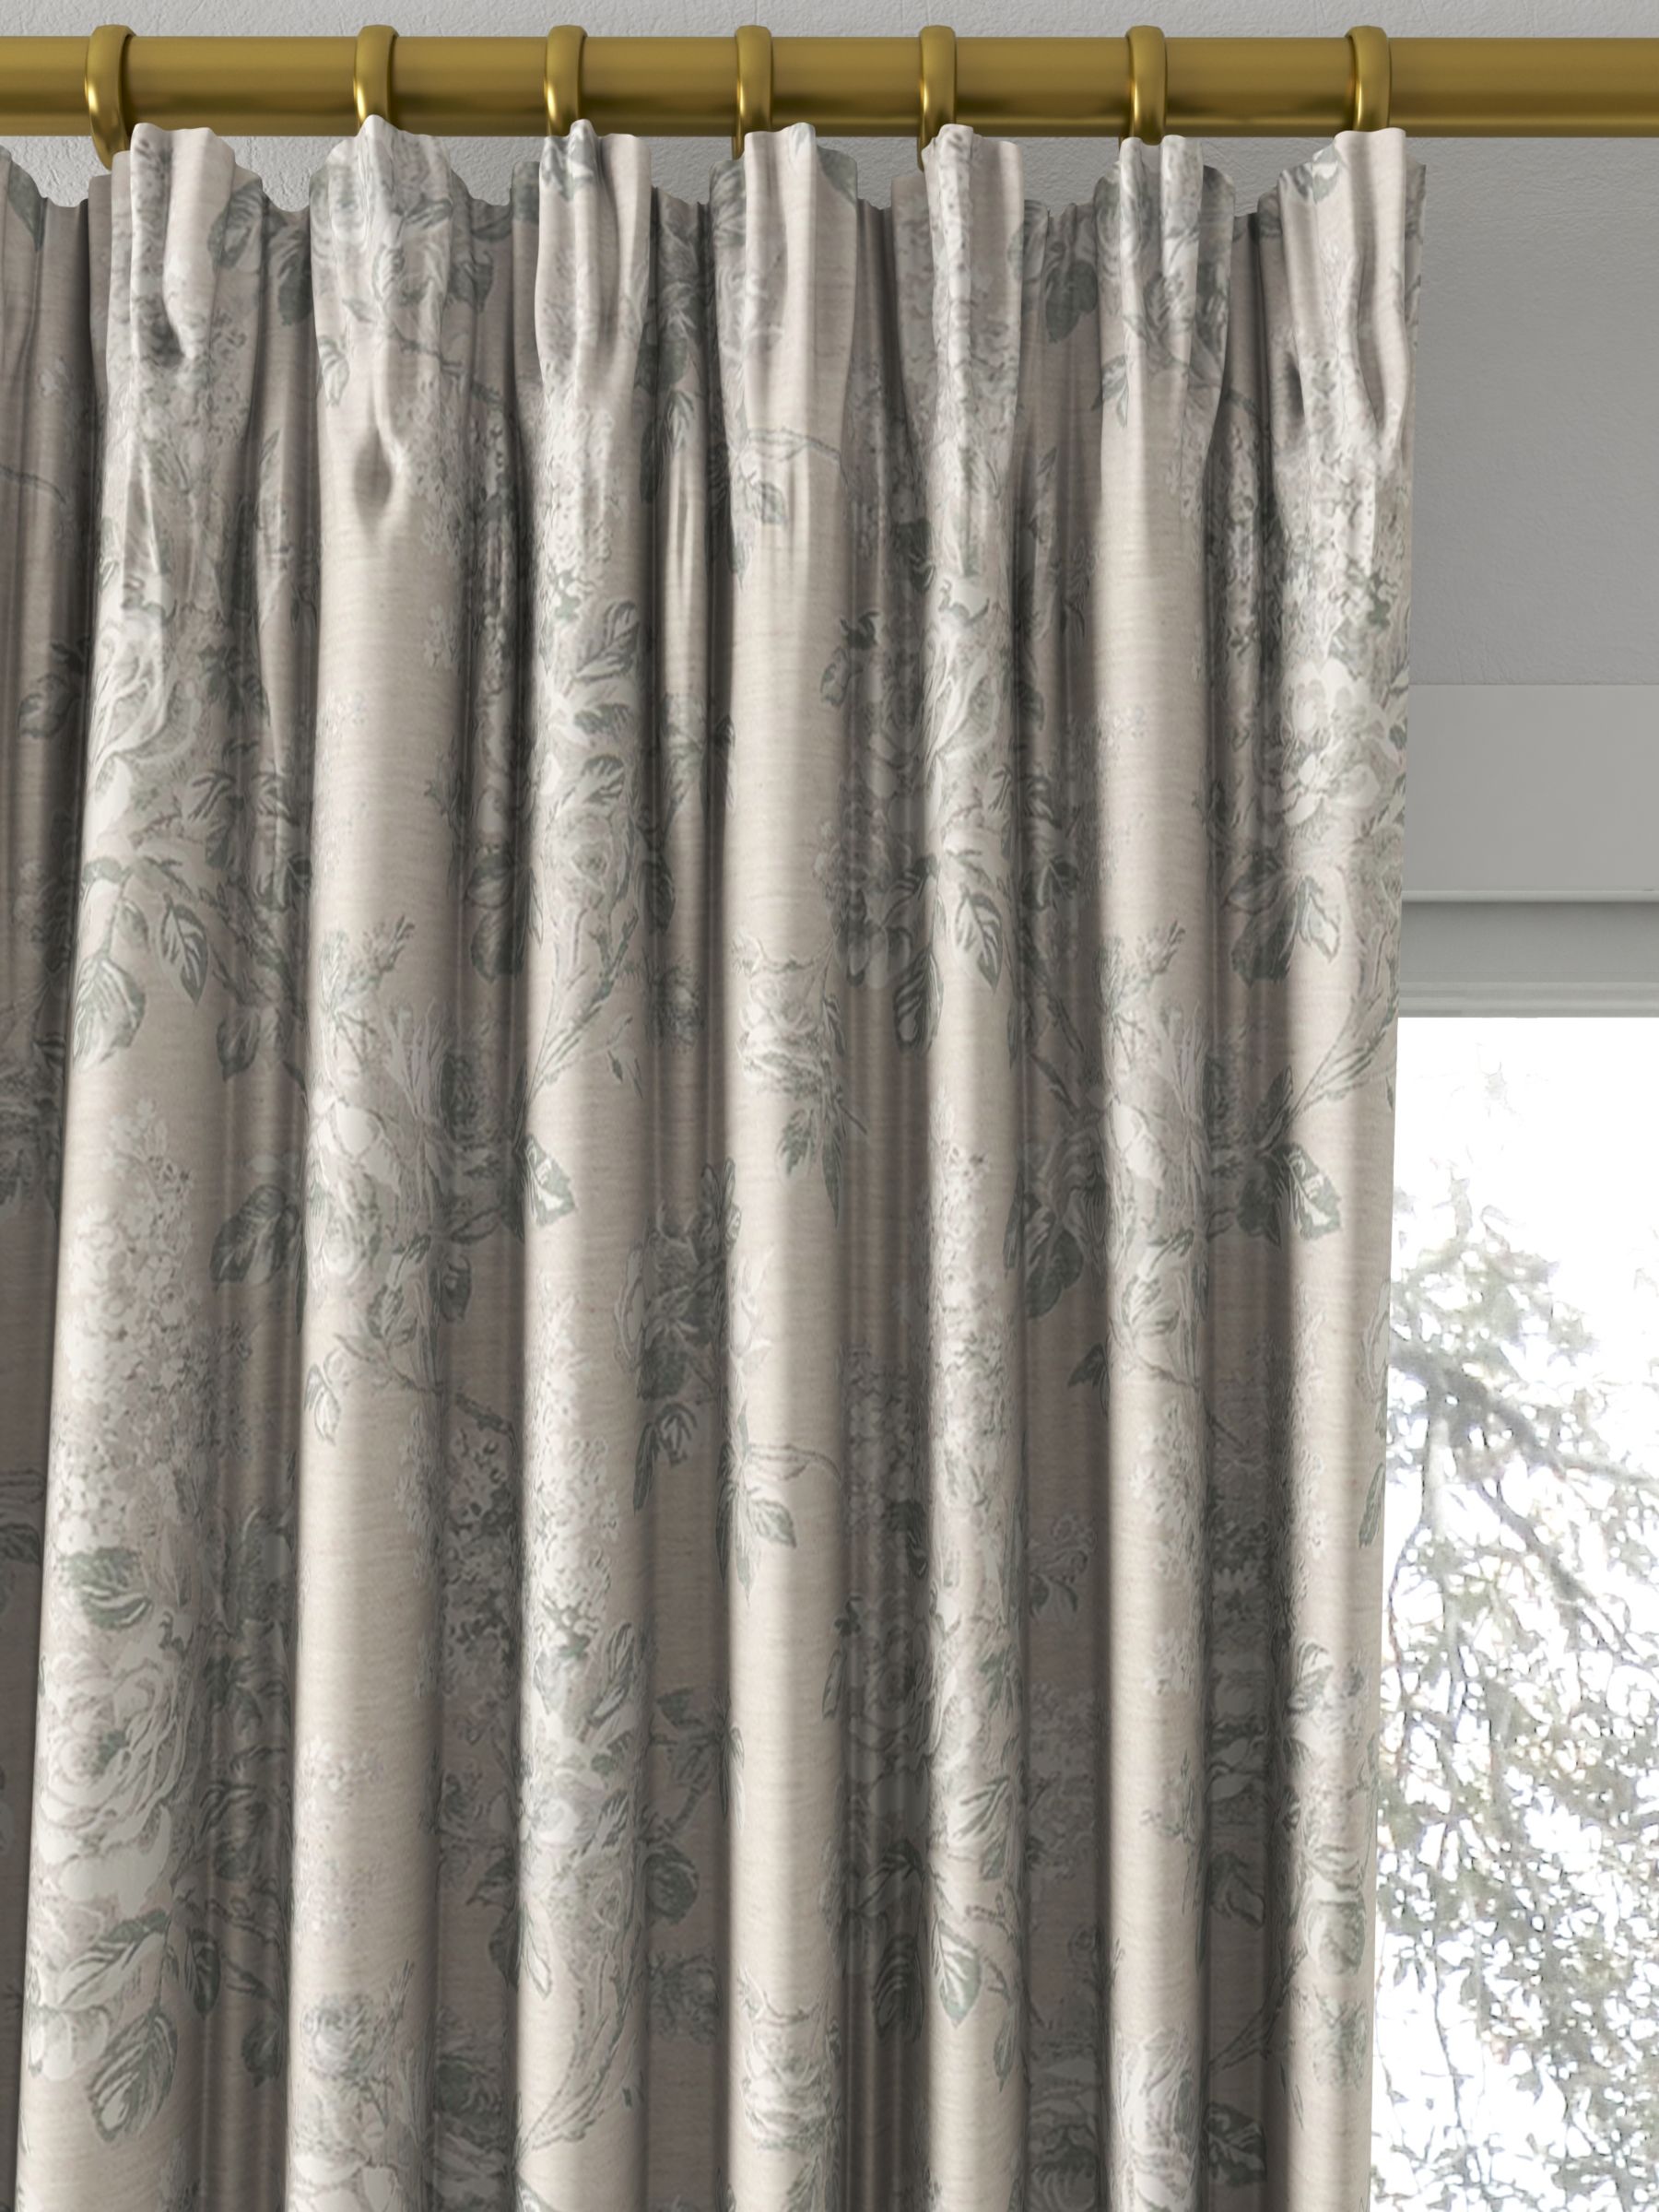 Sanderson Sorilla Damask Made to Measure Curtains, Eggshell/Linen